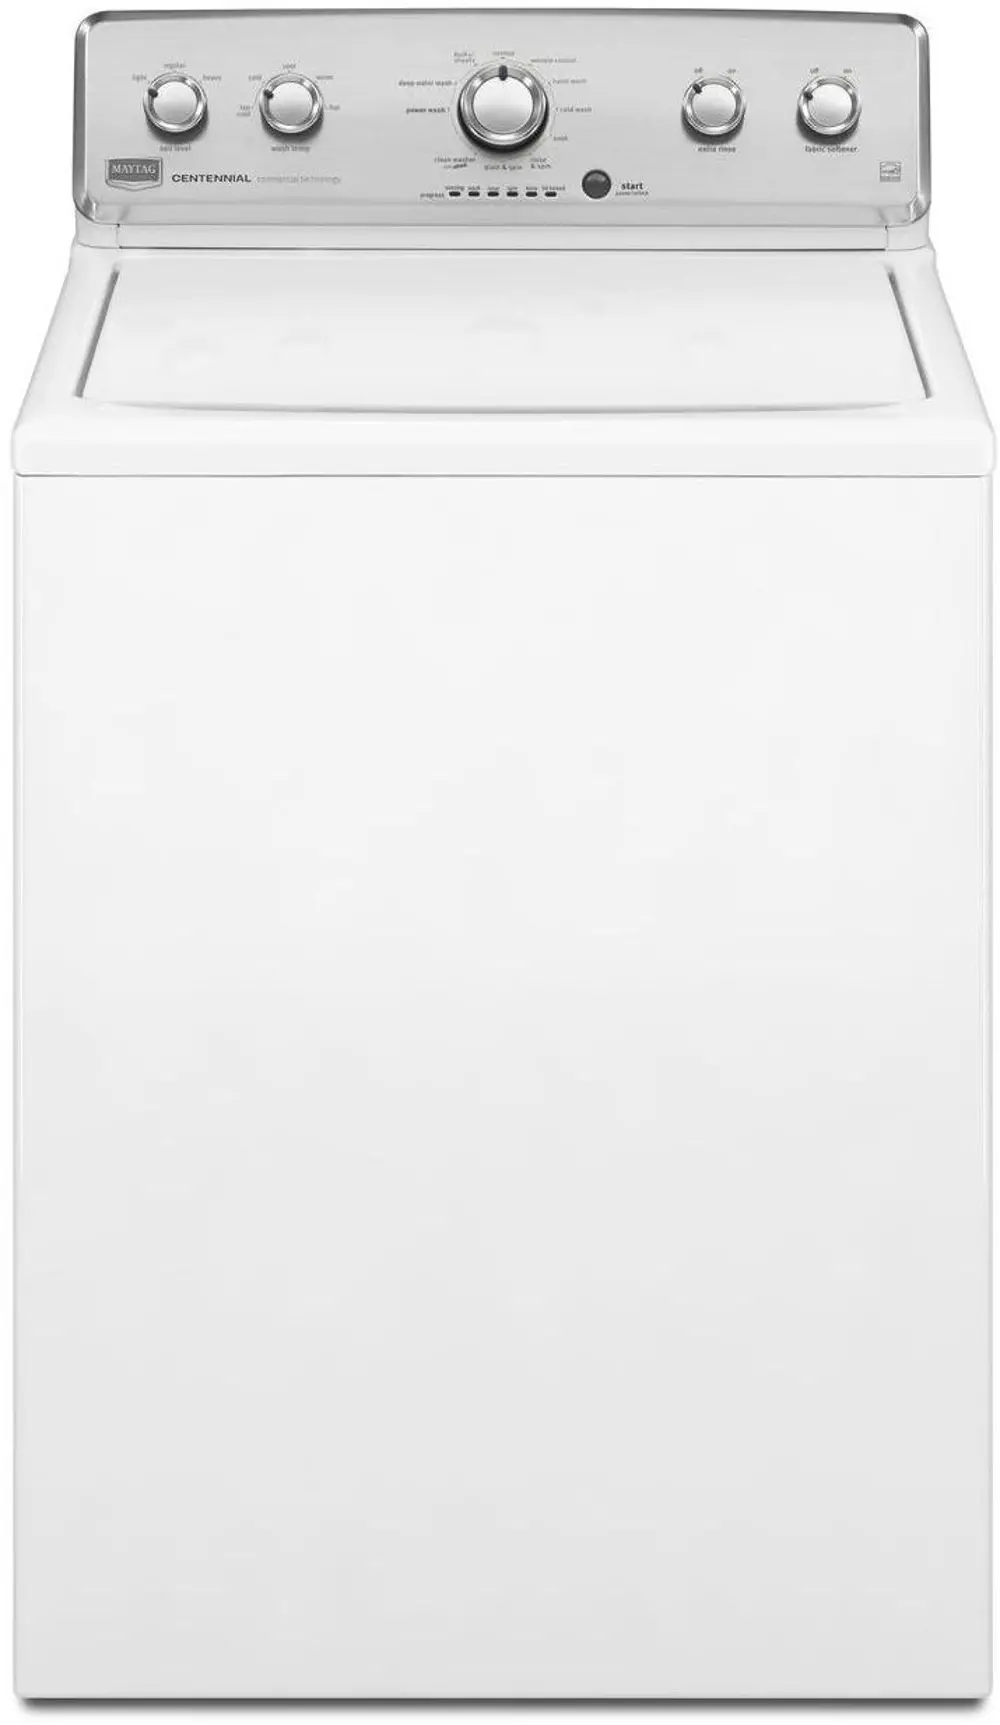 MVWC425BW Maytag 3.8 cu. ft. HE Top Load Washer with Fountain Impeller-1